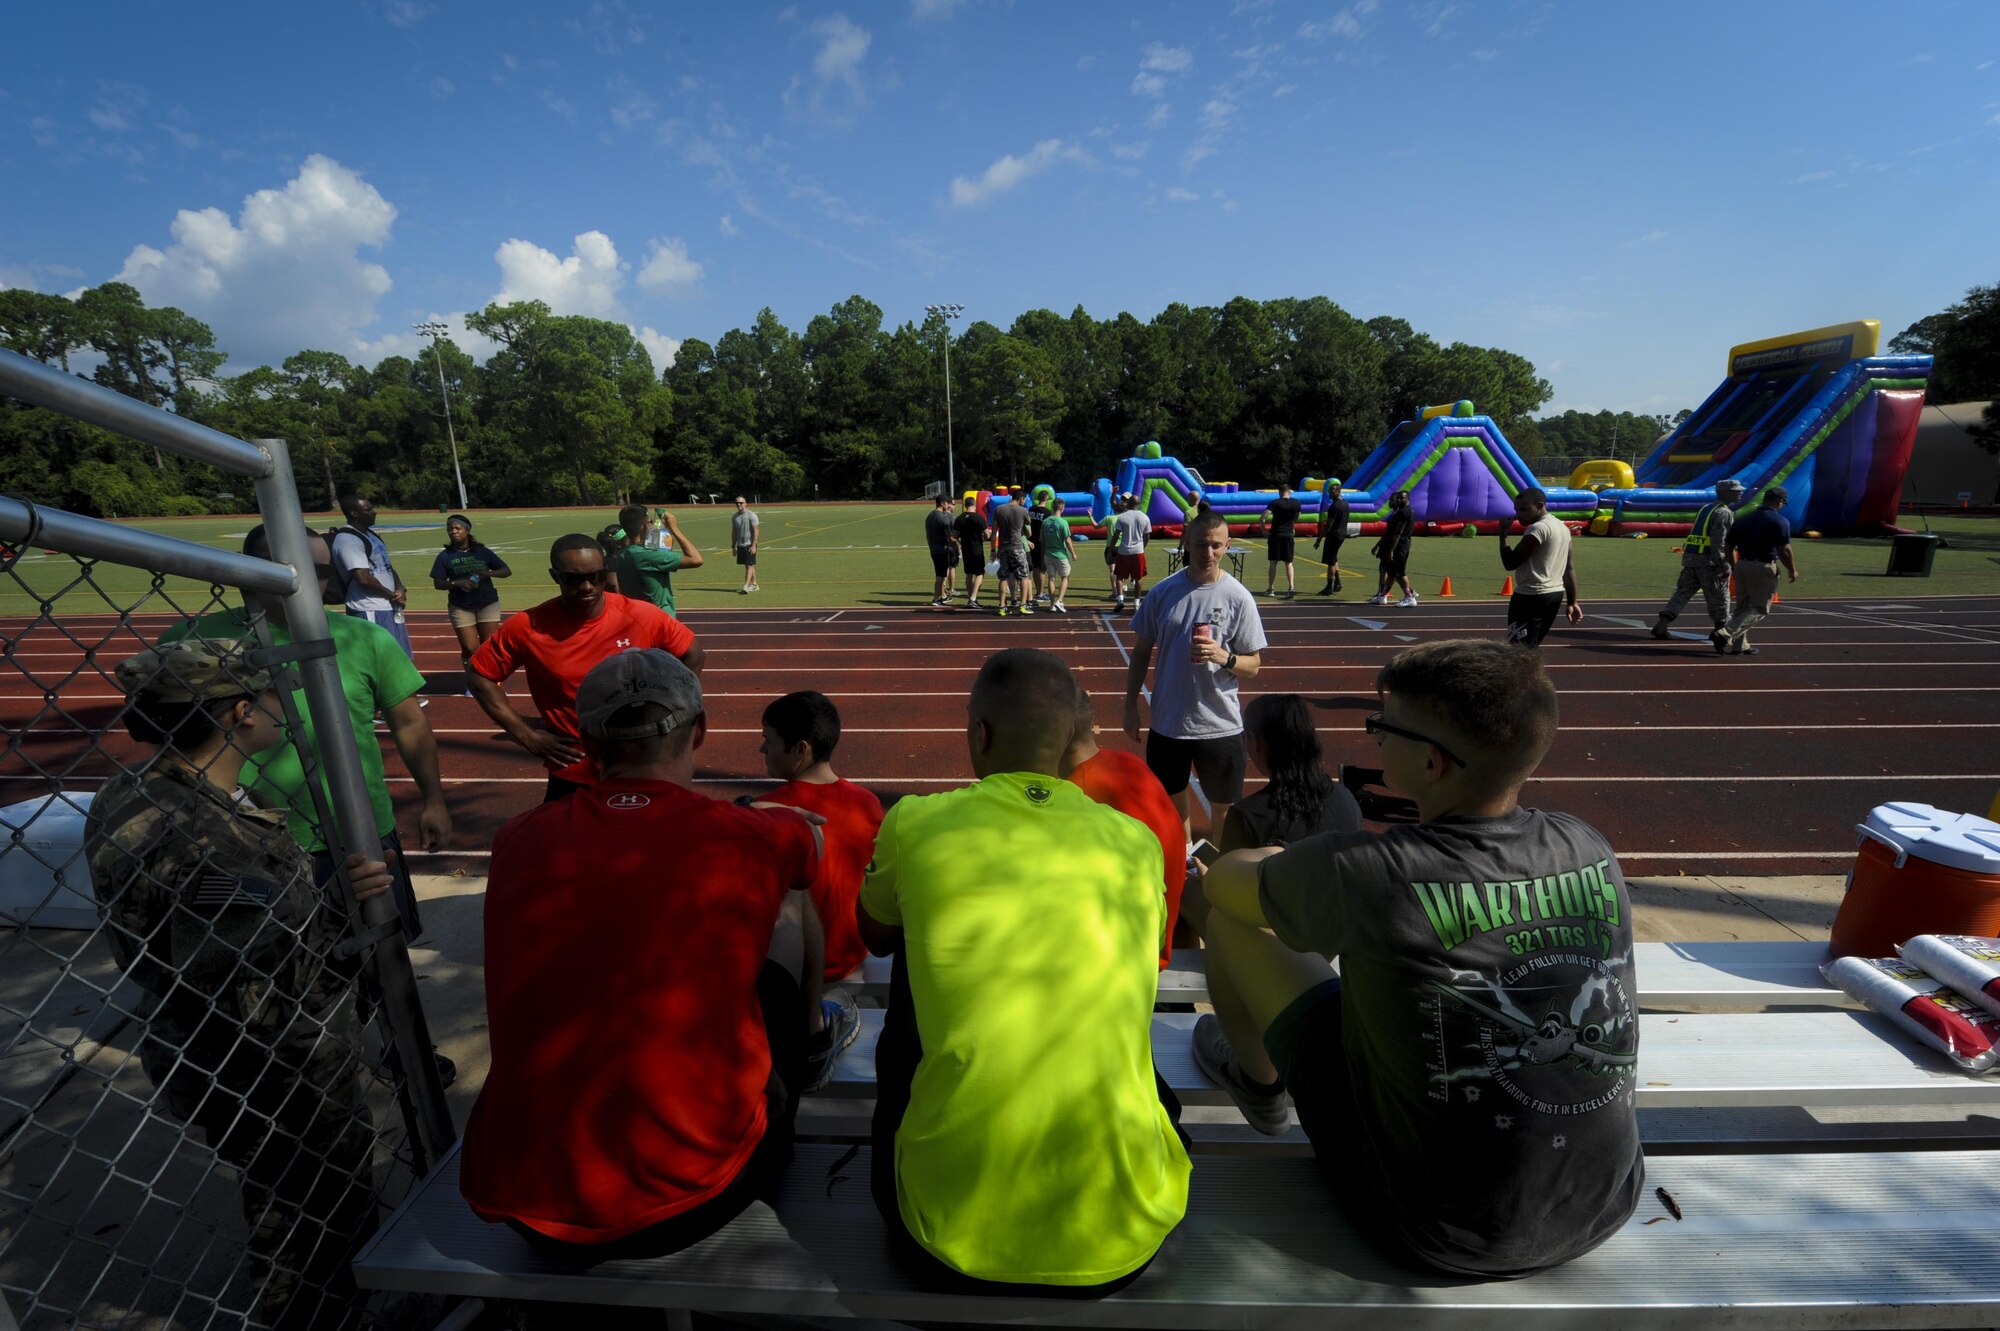 Air Commandos participate in the Green Dot Olympics at Hurlburt Field, Fla., Sept. 28, 2016. The event was held to raise awareness about the Green Dot initiative, a program designed to teach principles on reducing violence in a given community. (U.S. Air Force photo by Airman Dennis Spain)